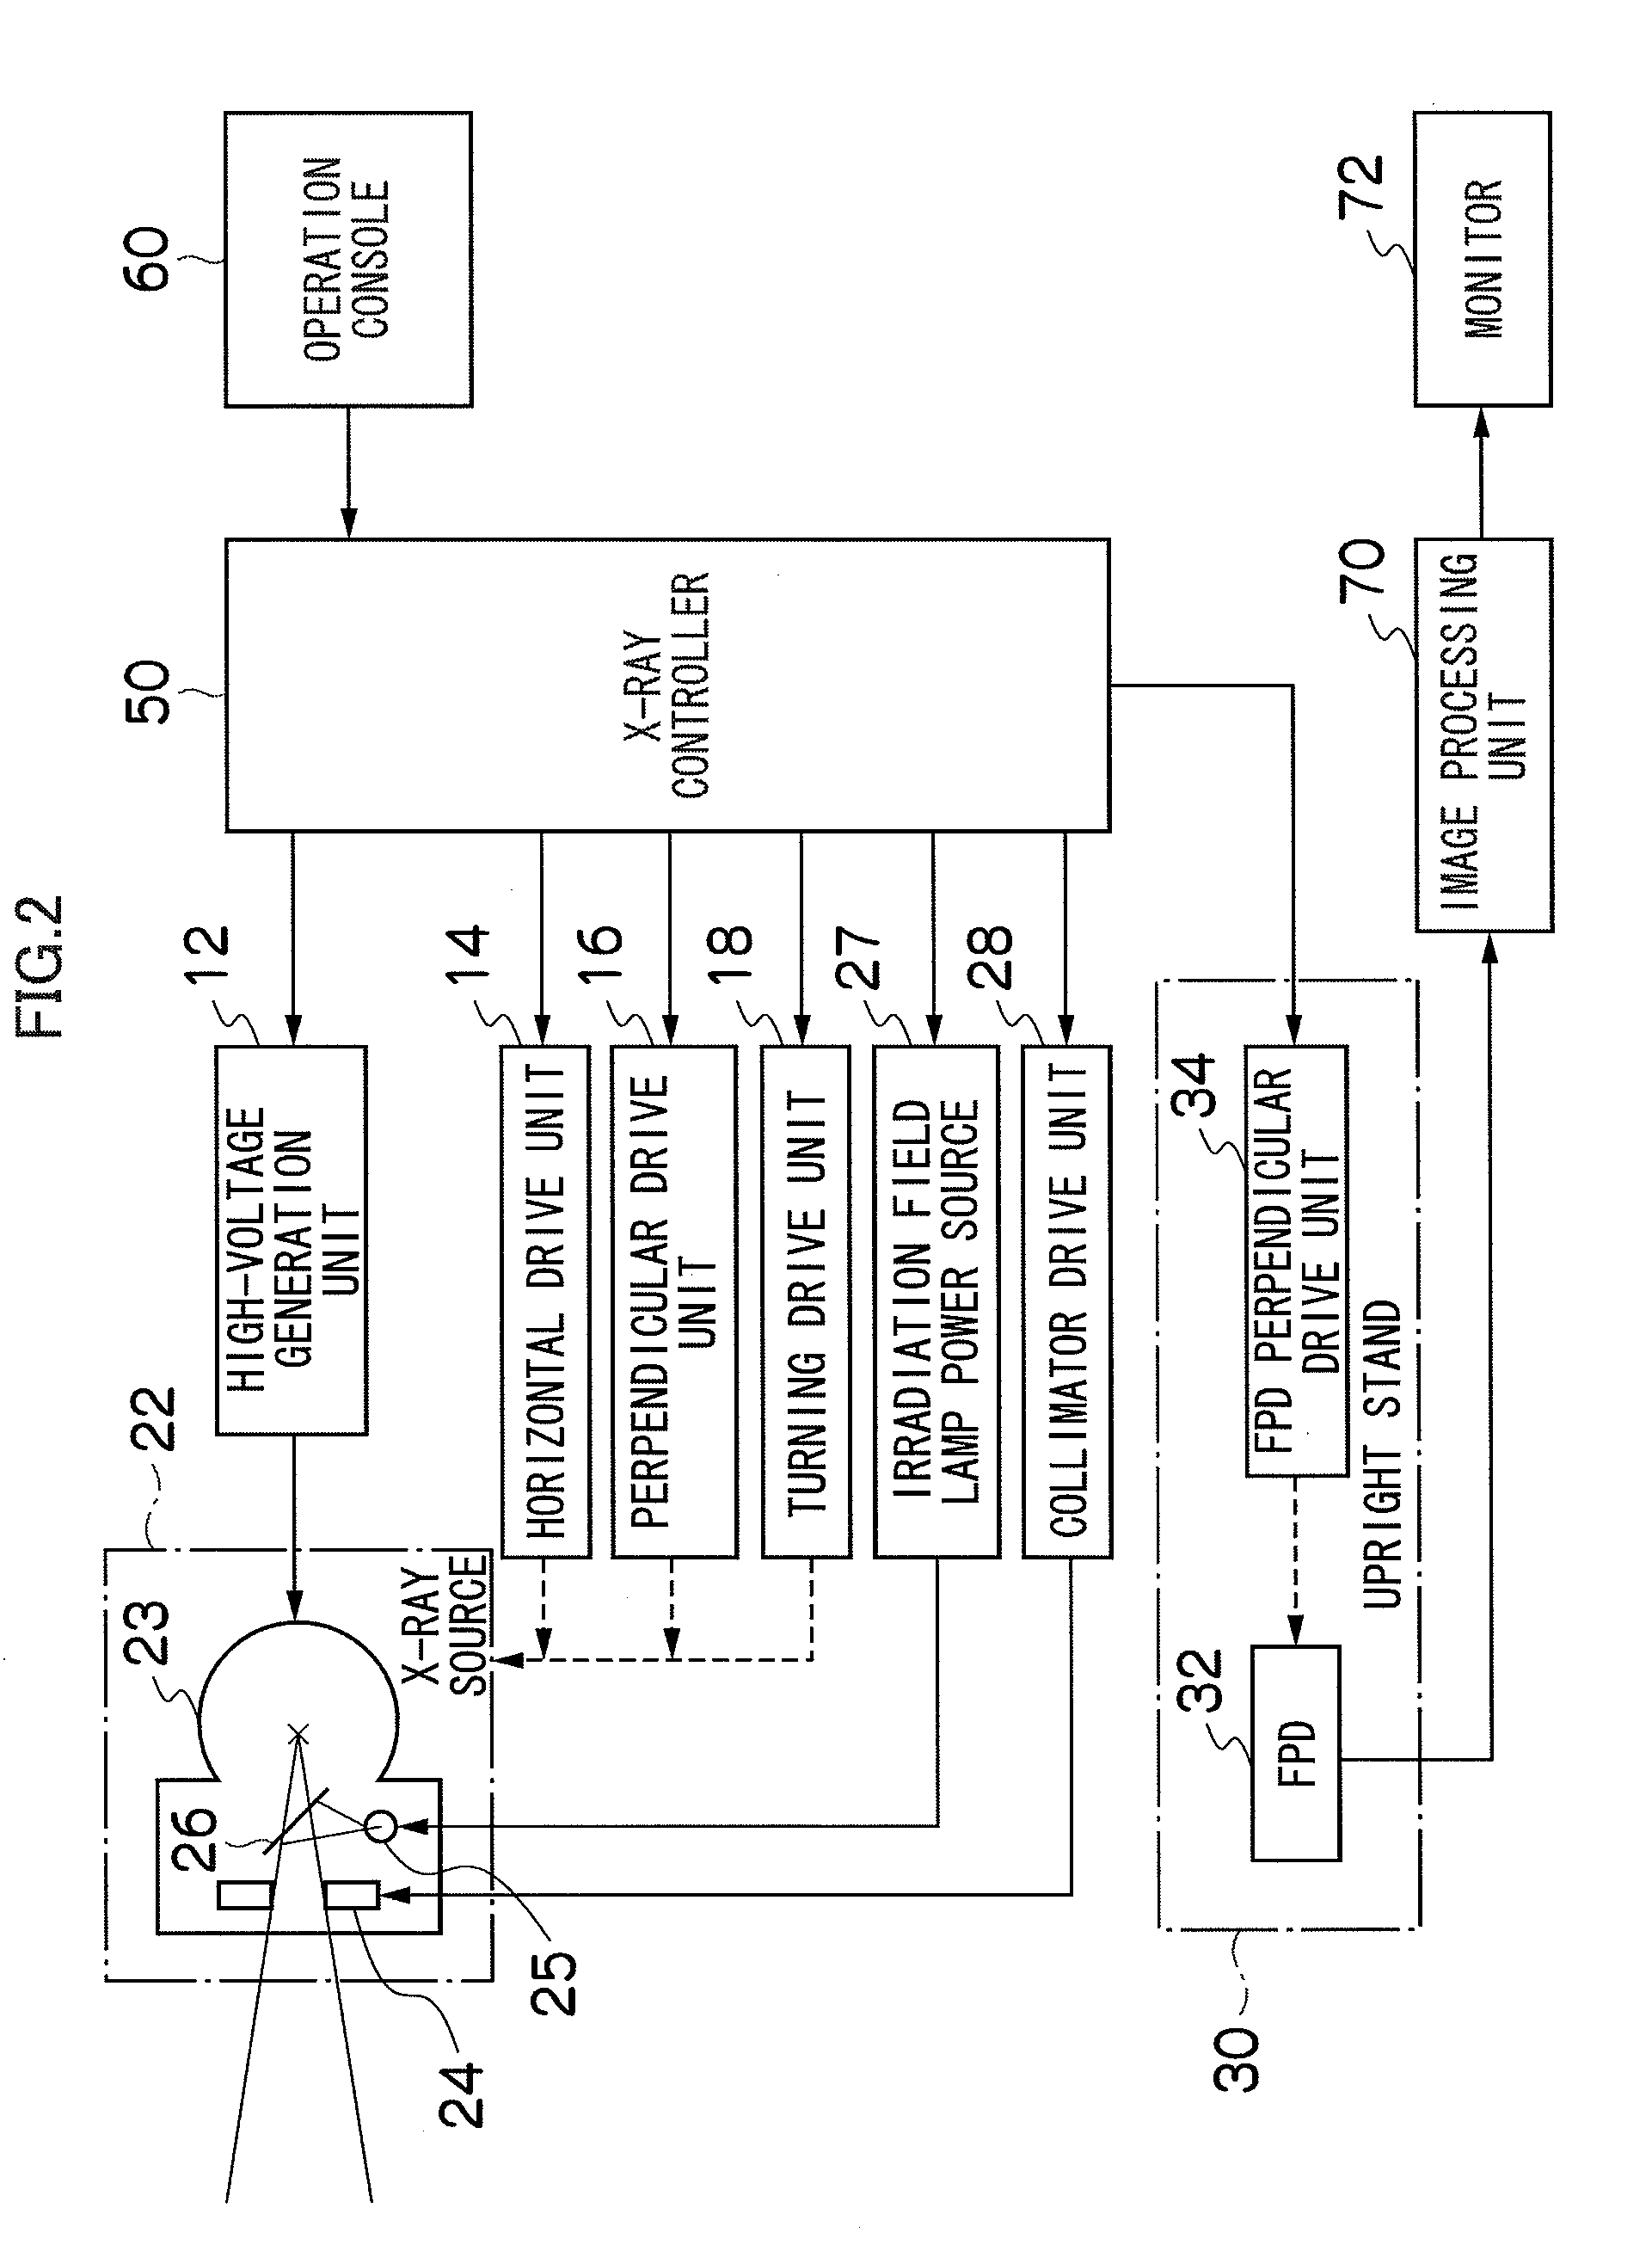 X-ray radiographic apparatus and method